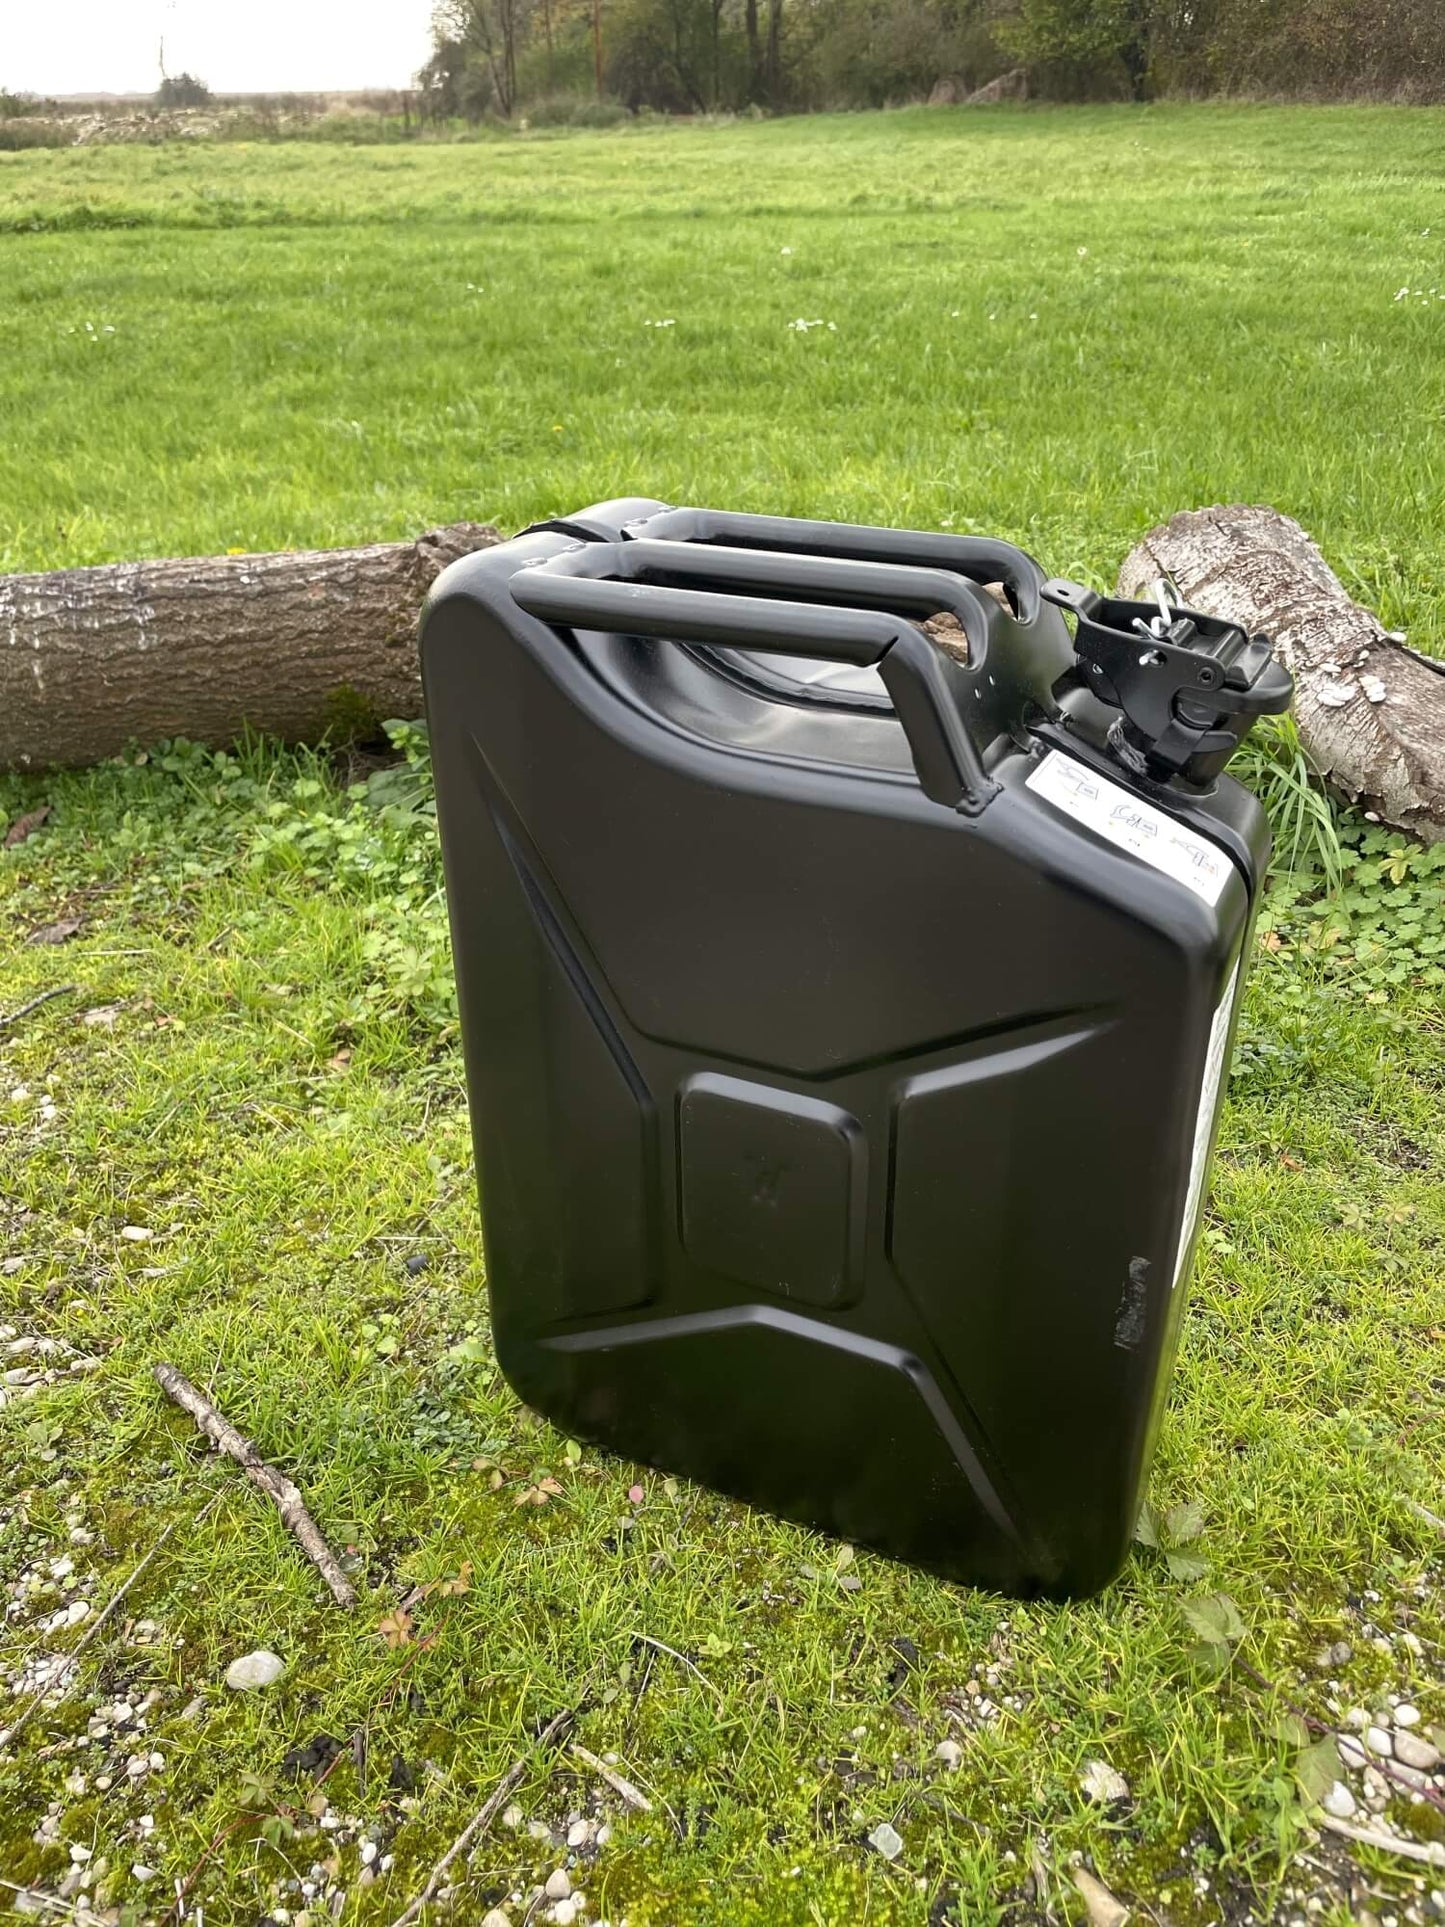 JERRY CAN 20L